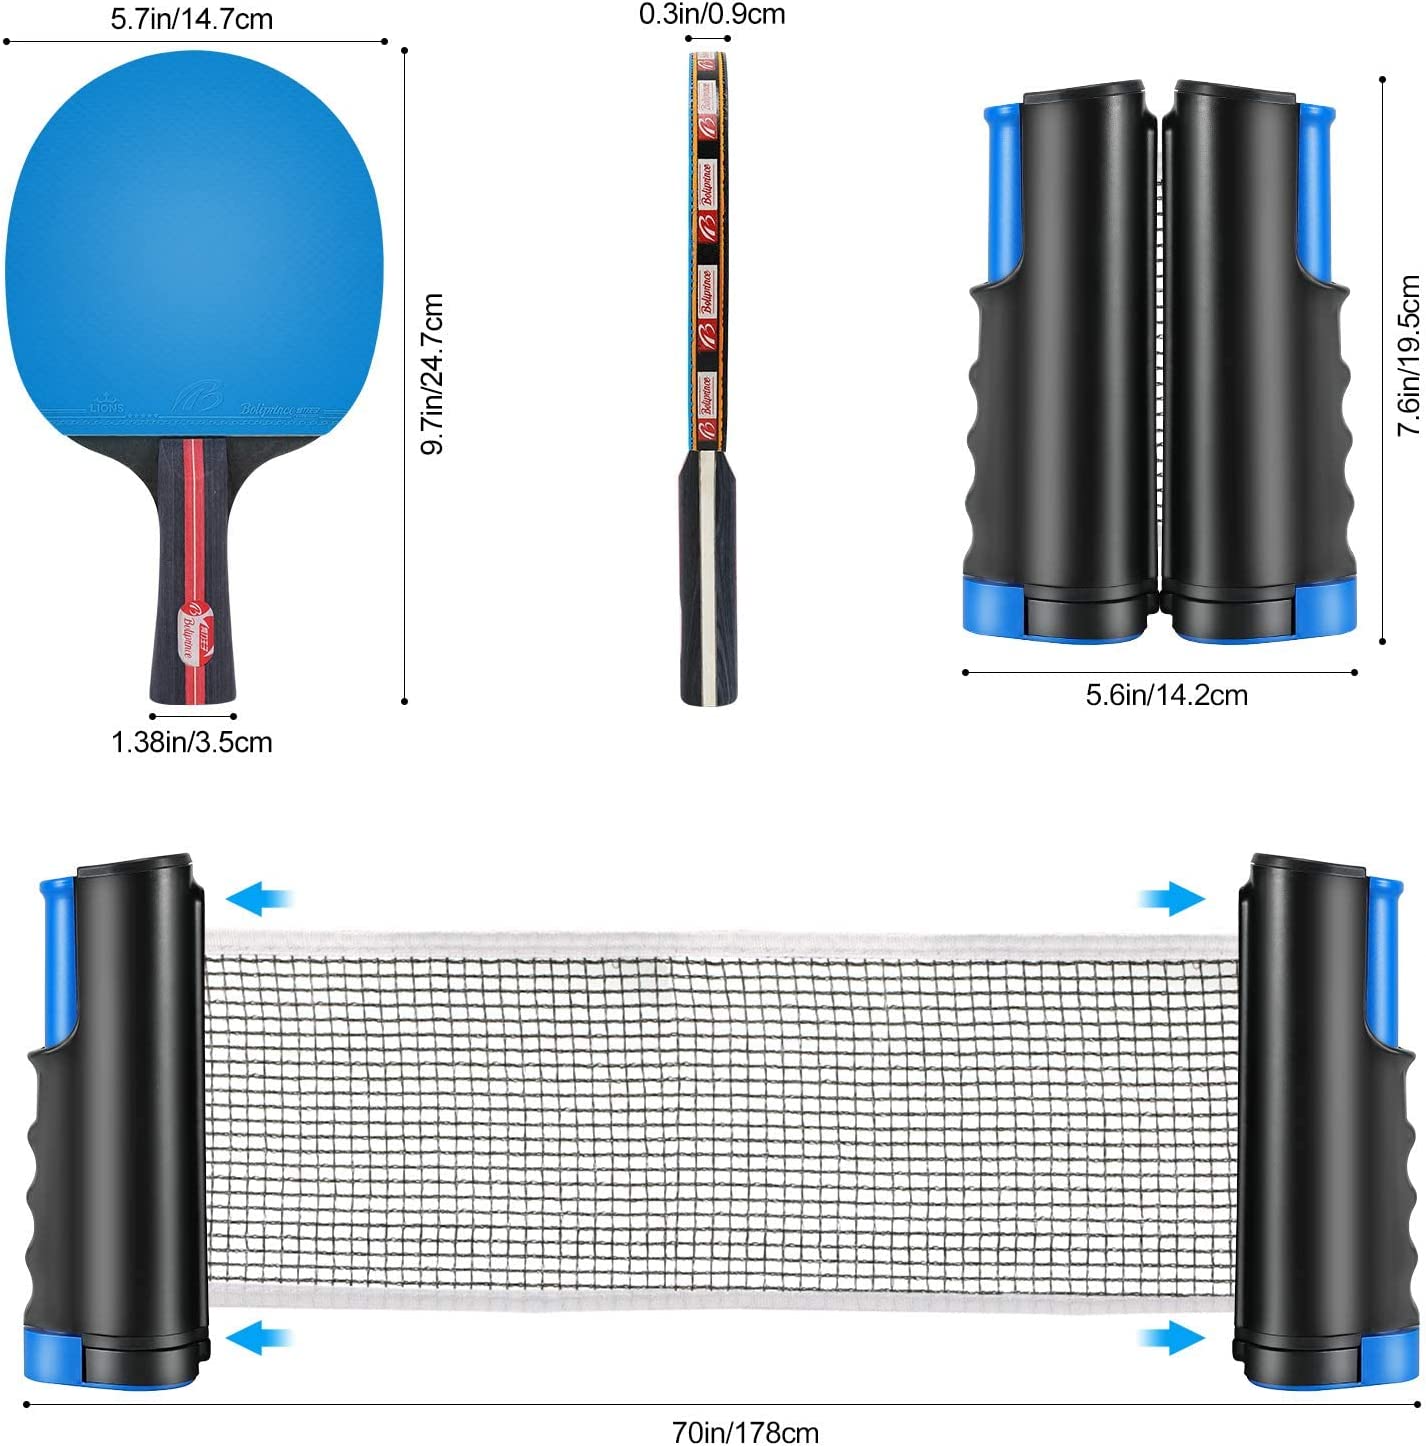 The best ping pong paddle set